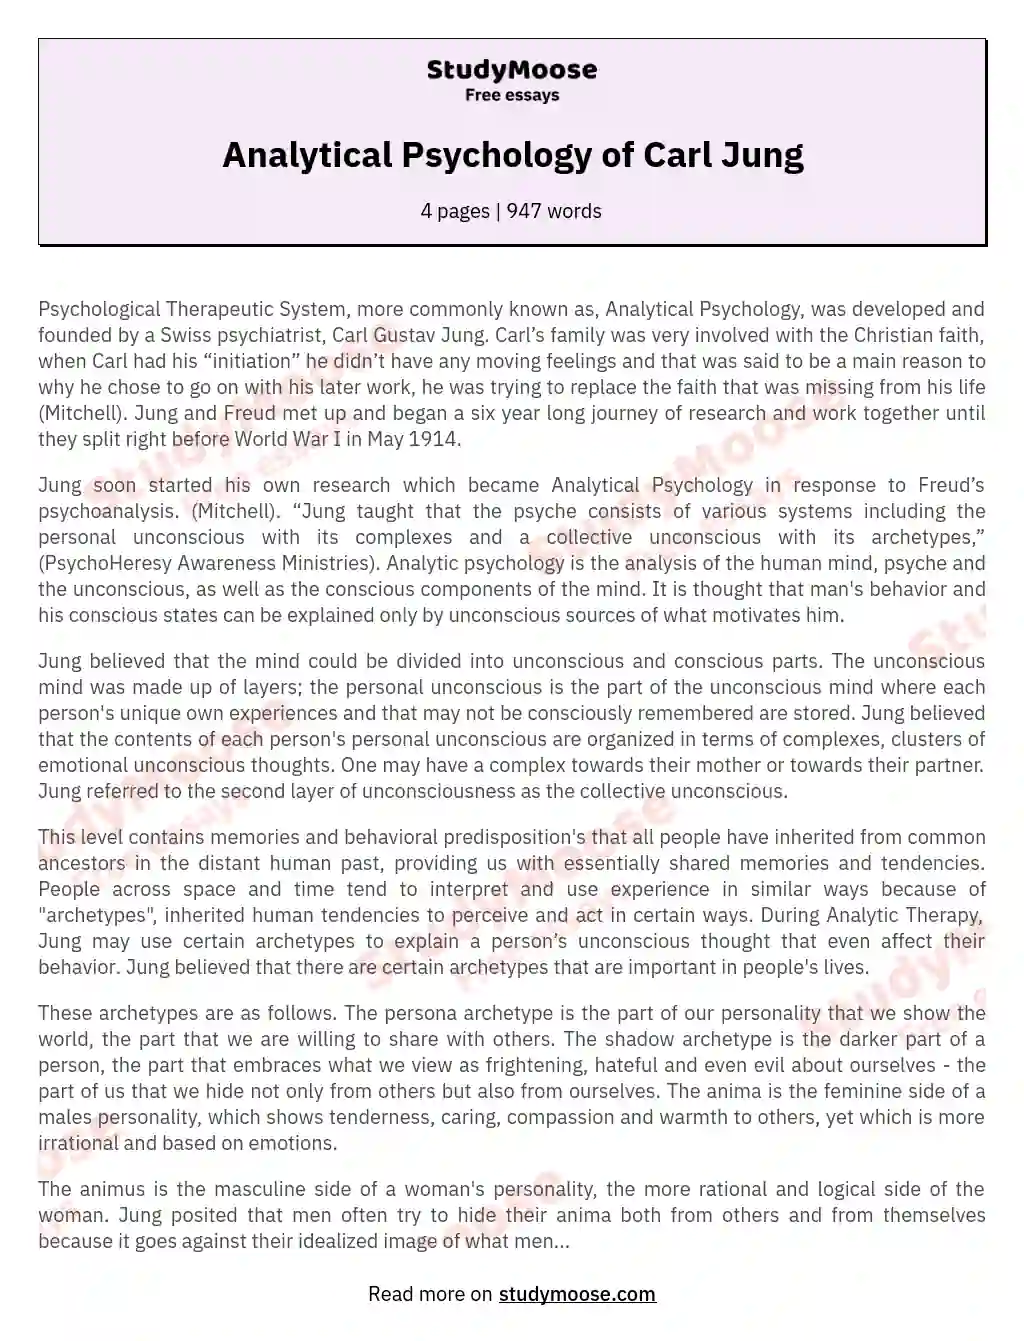 Analytical Psychology of Carl Jung essay